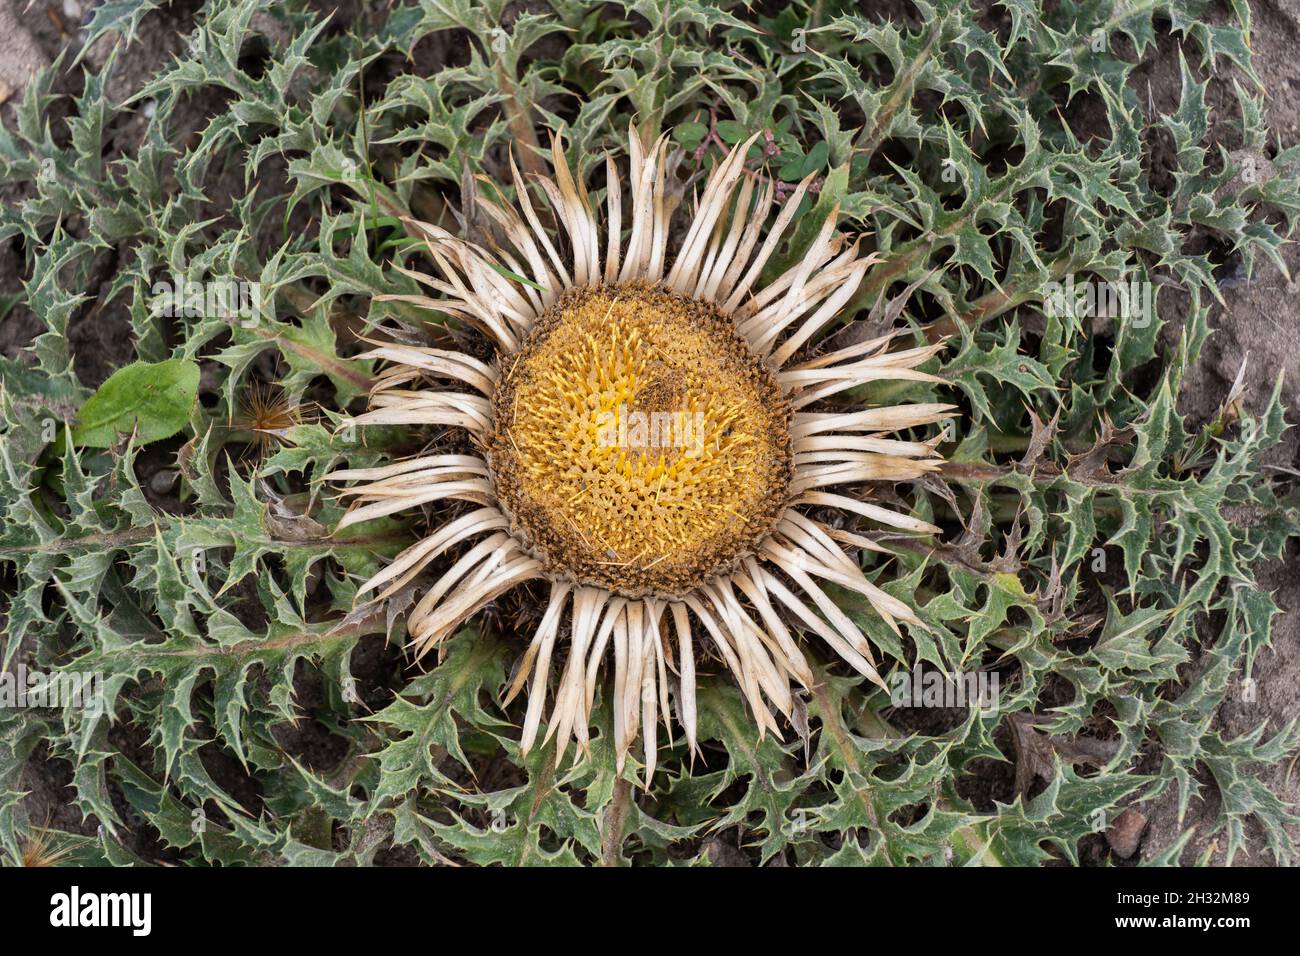 Carlina acanthifolia Carline thistle flower, perennial herb in the family: Asteraceae. Stock Photo